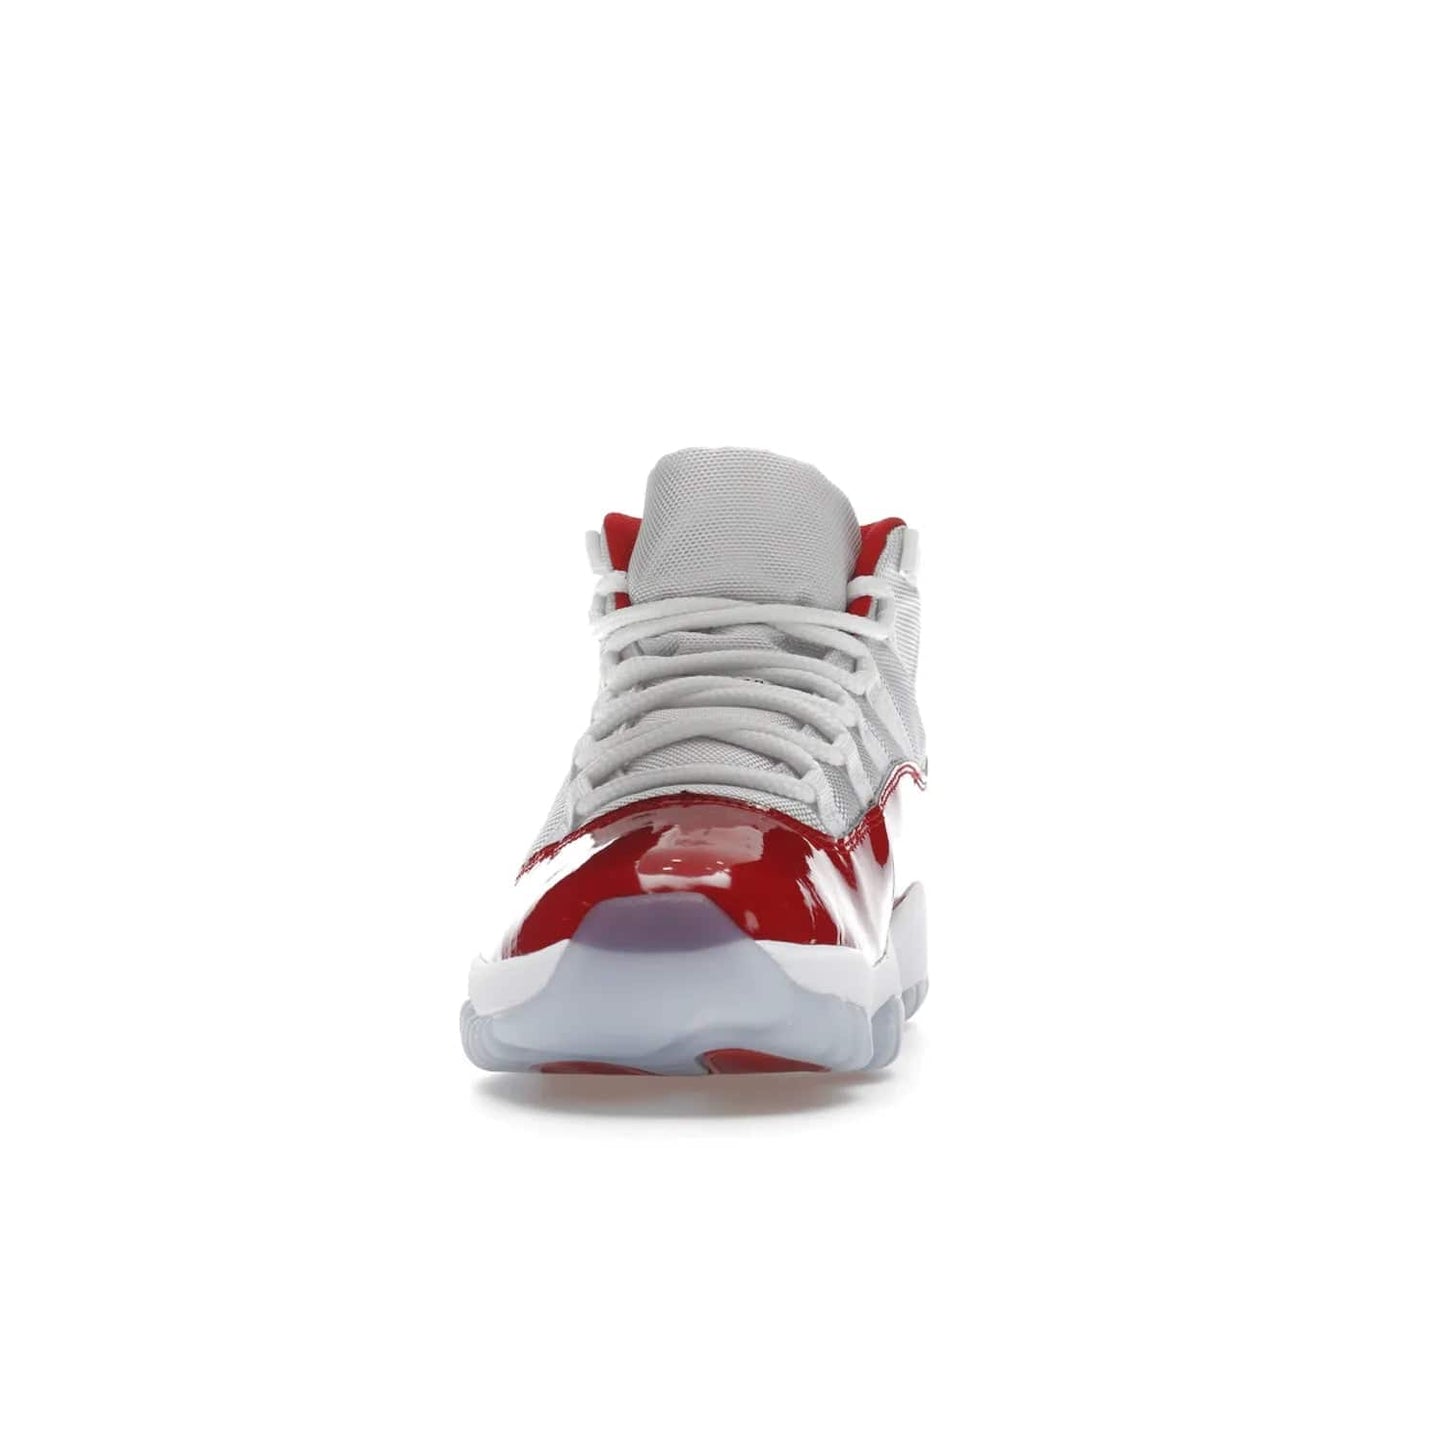 Jordan 11 Retro Cherry (2022) - Image 11 - Only at www.BallersClubKickz.com - The Air Jordan 11 Cherry features classic patent leather with Cherry red accents, icy blue outsole, and debossed 23 on the heel tab. Refresh your sneaker game with this iconic update, available December 10, 2022.